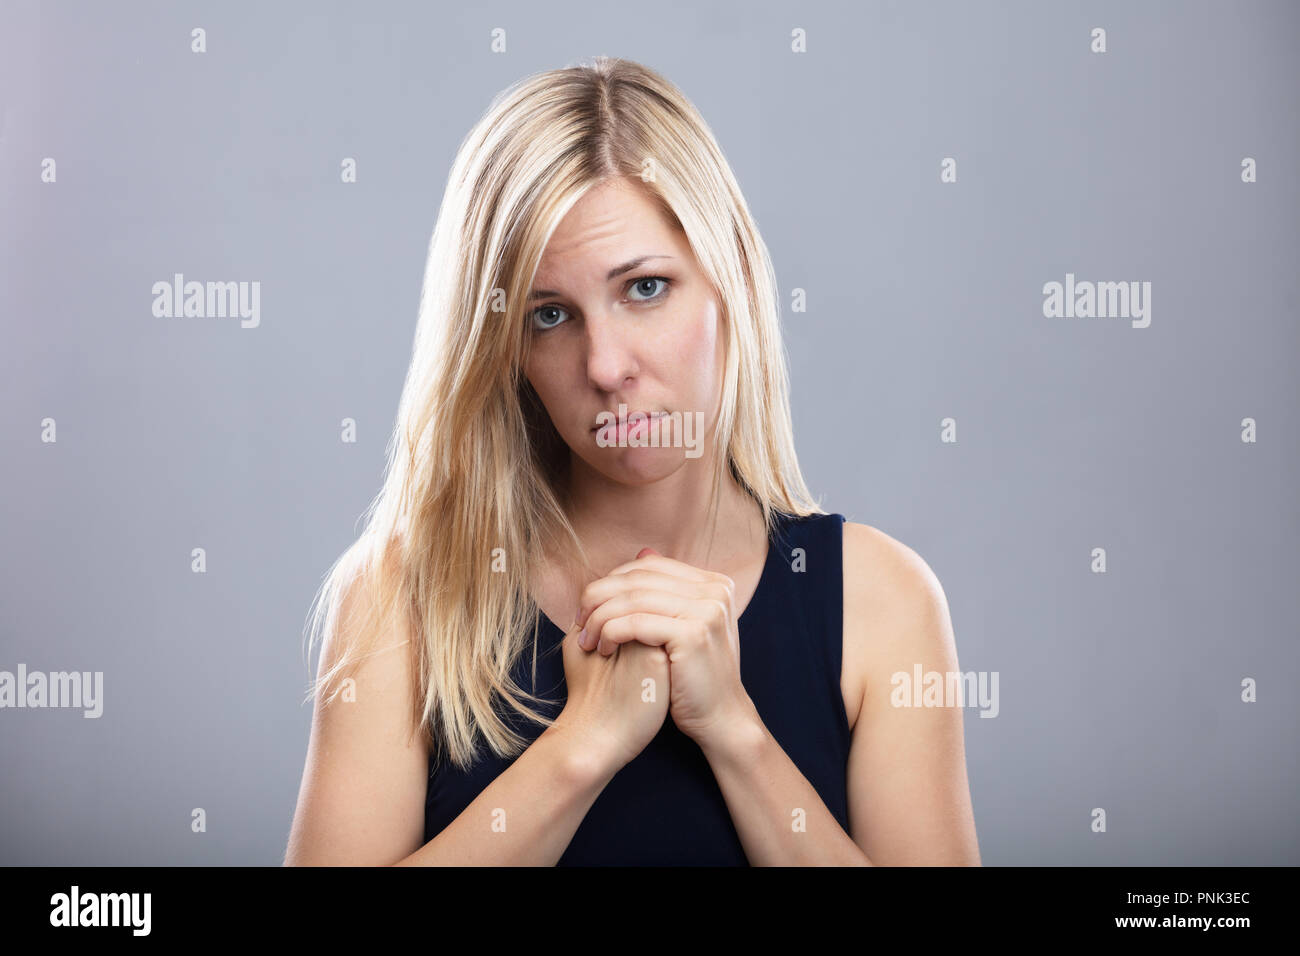 Portrait Of A Sad Young Woman On Grey Background Stock Photo